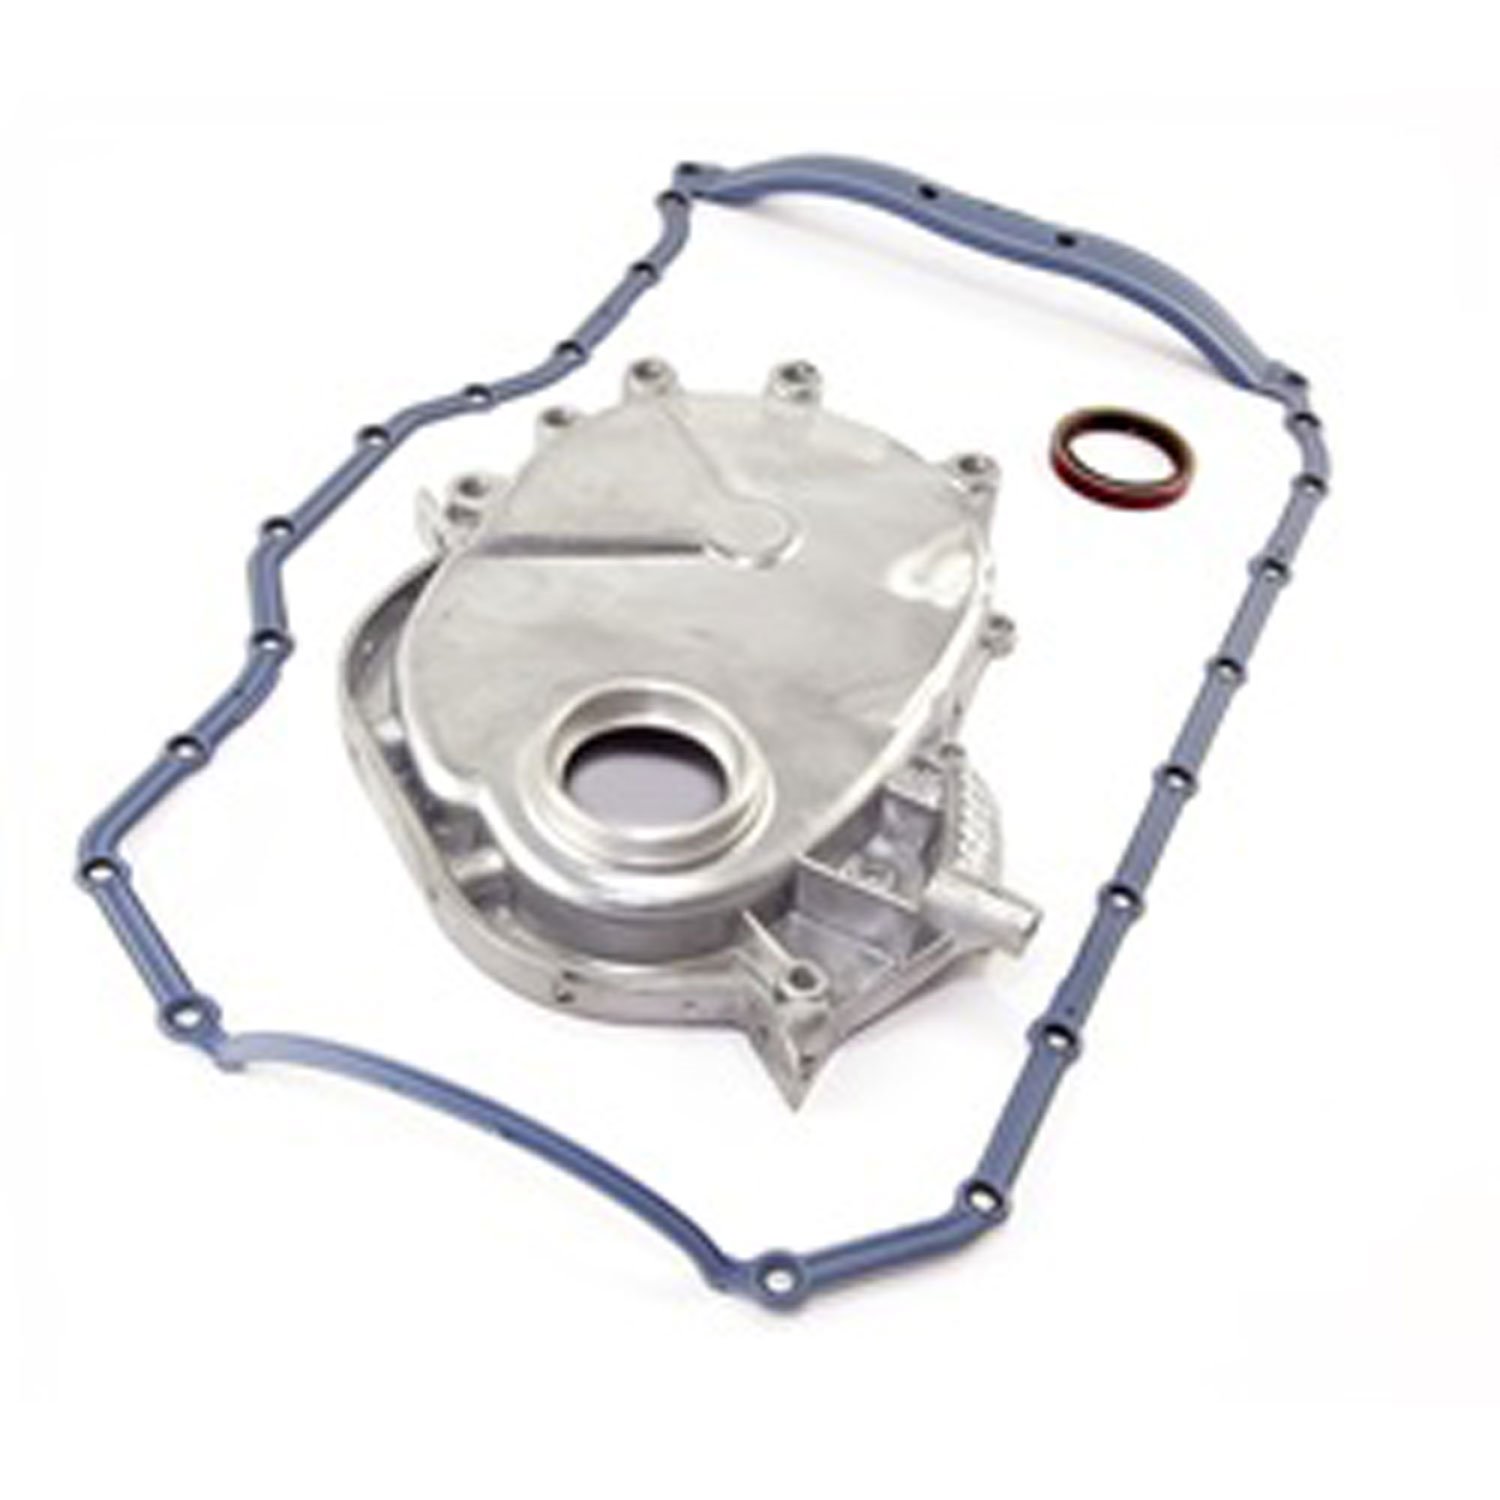 Replacement timing chain cover kit from Omix-ADA, Fits 83-93 Jeep models with a 2.5 liter 4-cylinder engine.